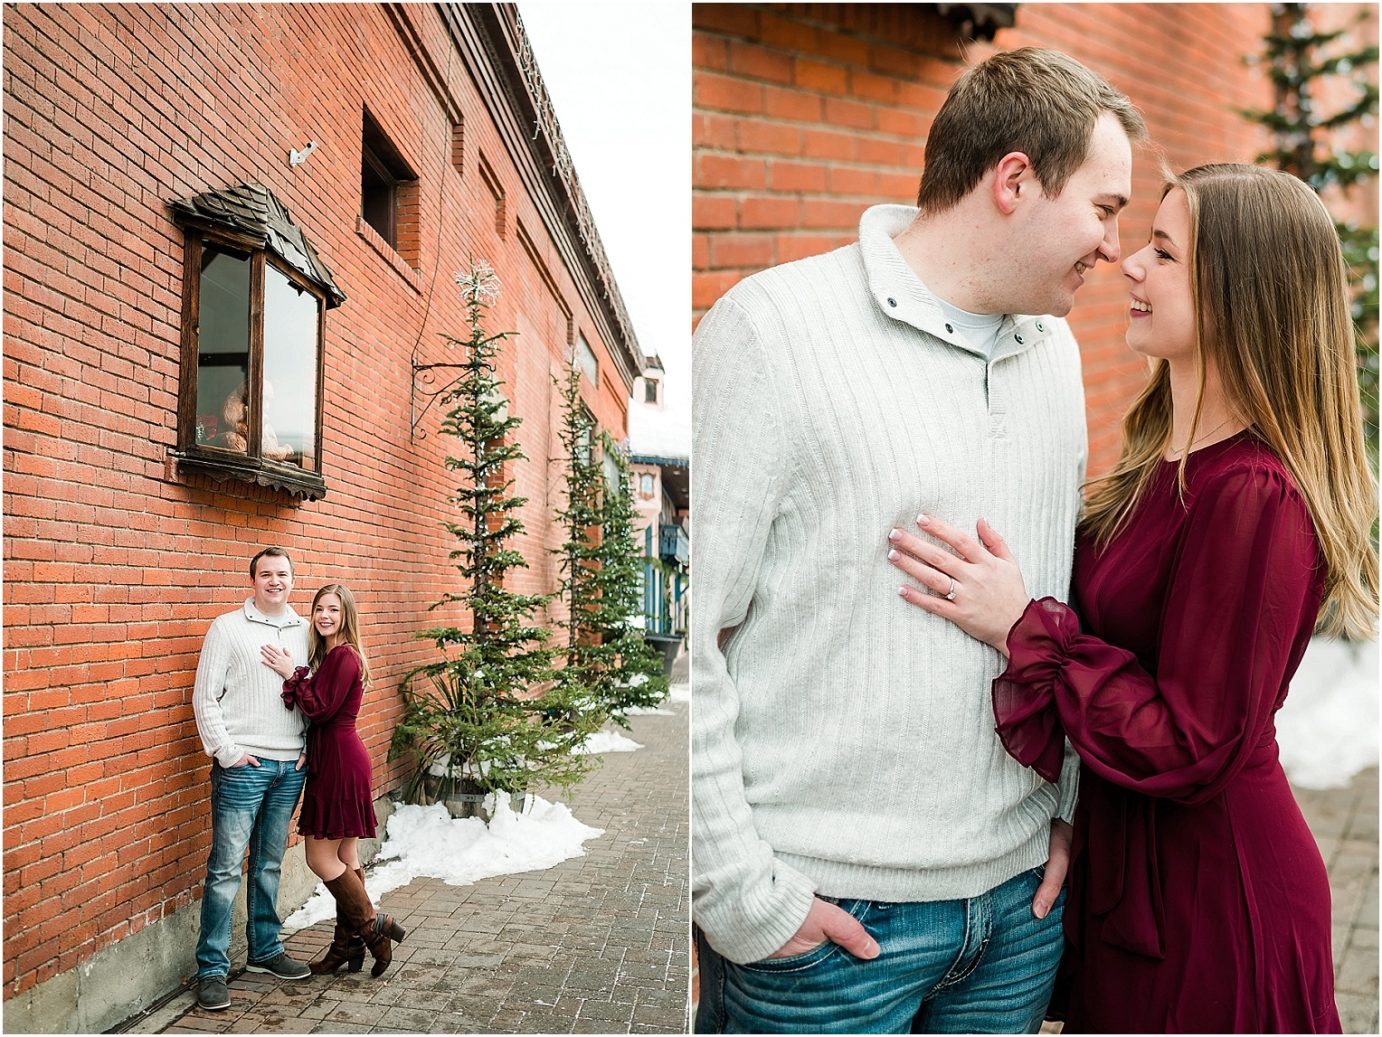 Leavenworth Engagement Session Leavenworth Photographer Dylan and Sydney couple walking on the streets of Leavenworth